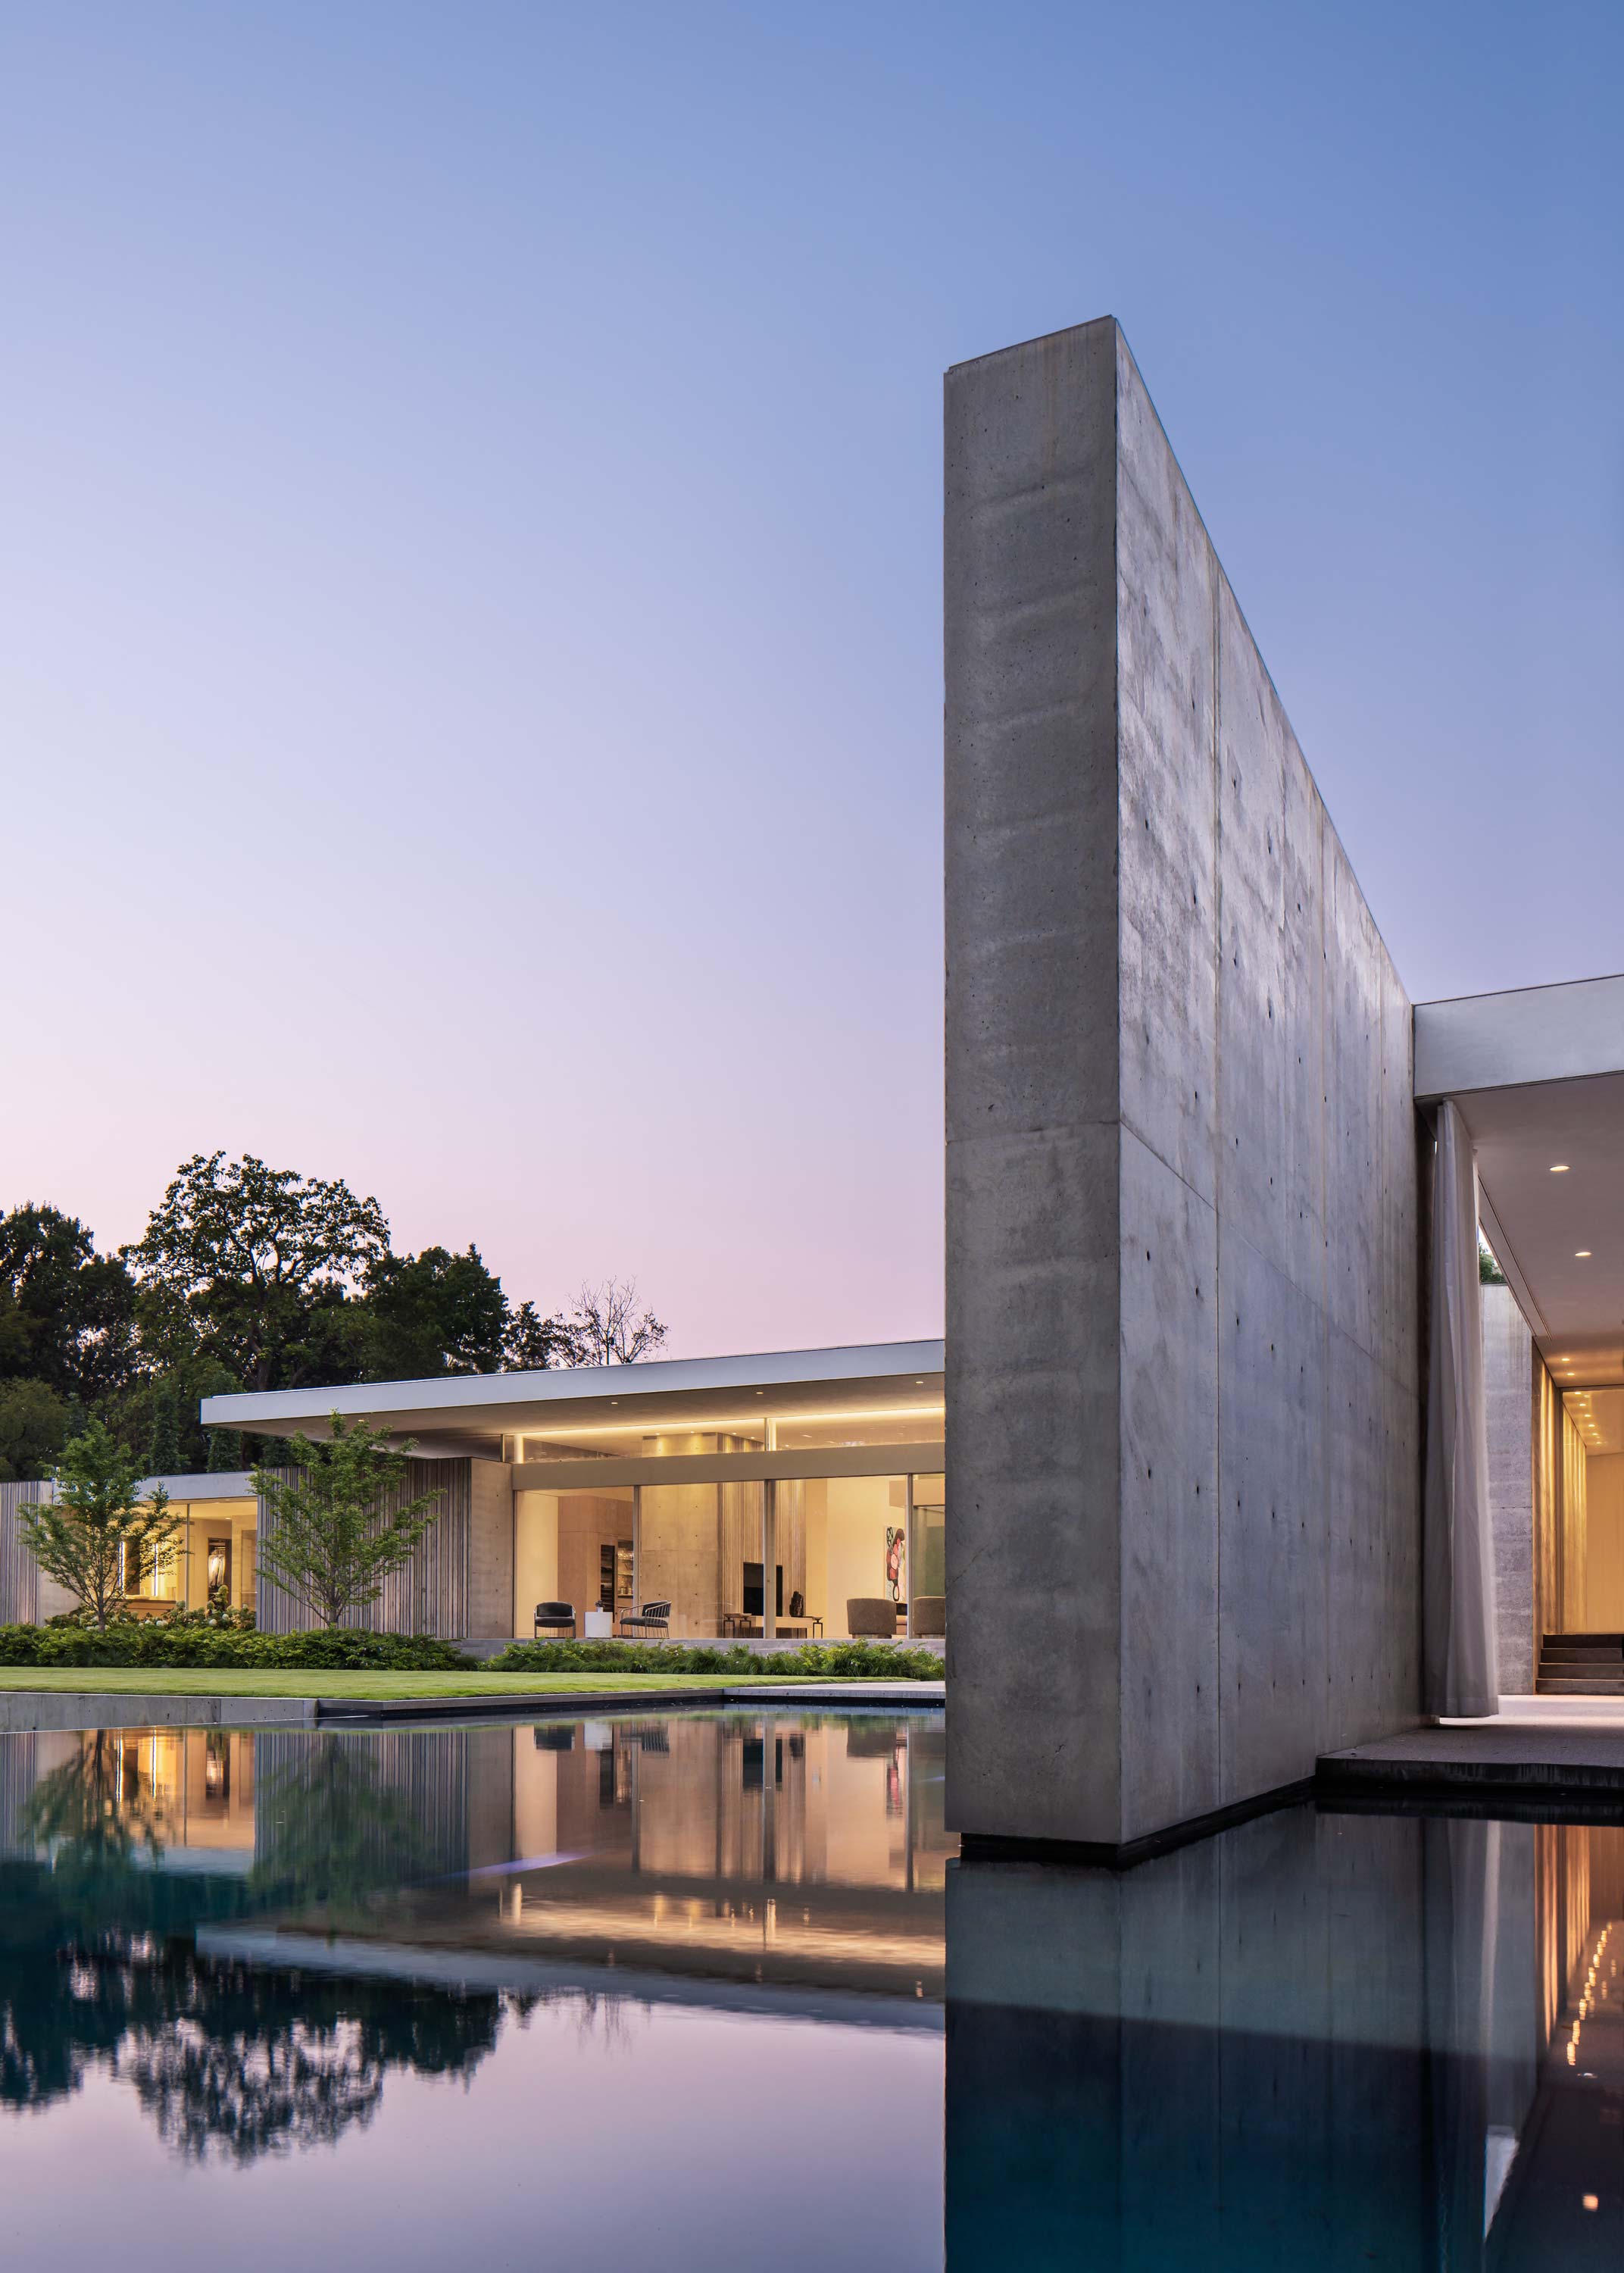 Exterior photo of the Preston Hollow Residence by Specht Novak Architects. Shot at dusk by Manolo Langis, featuring pool, monolithic wall, and yard.